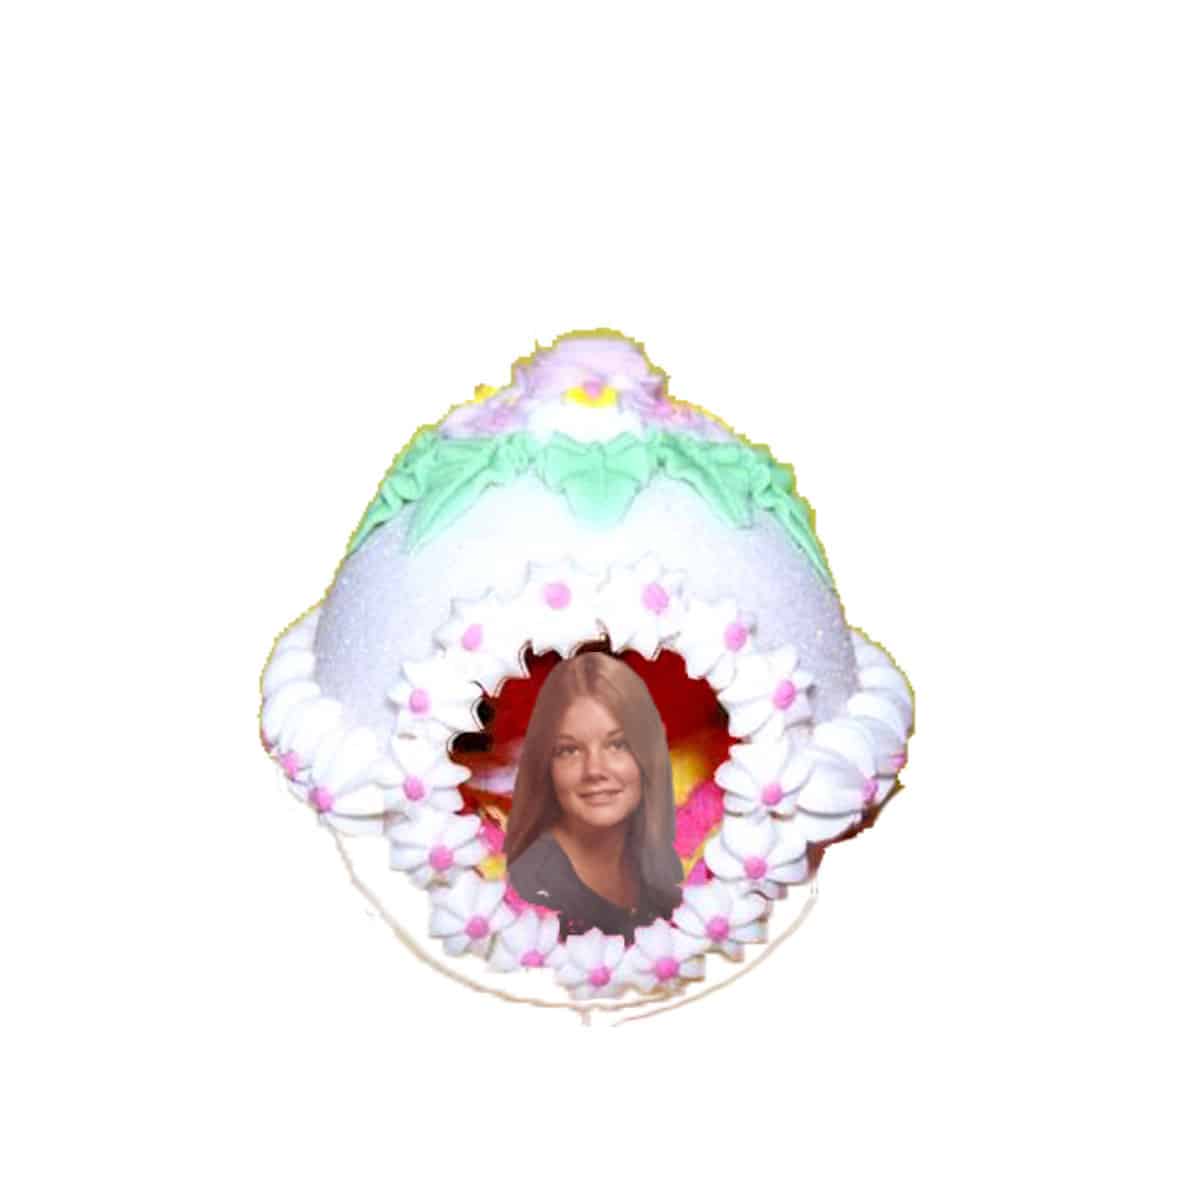 digital collage of sugar easter egg with photograph of a woman inside.